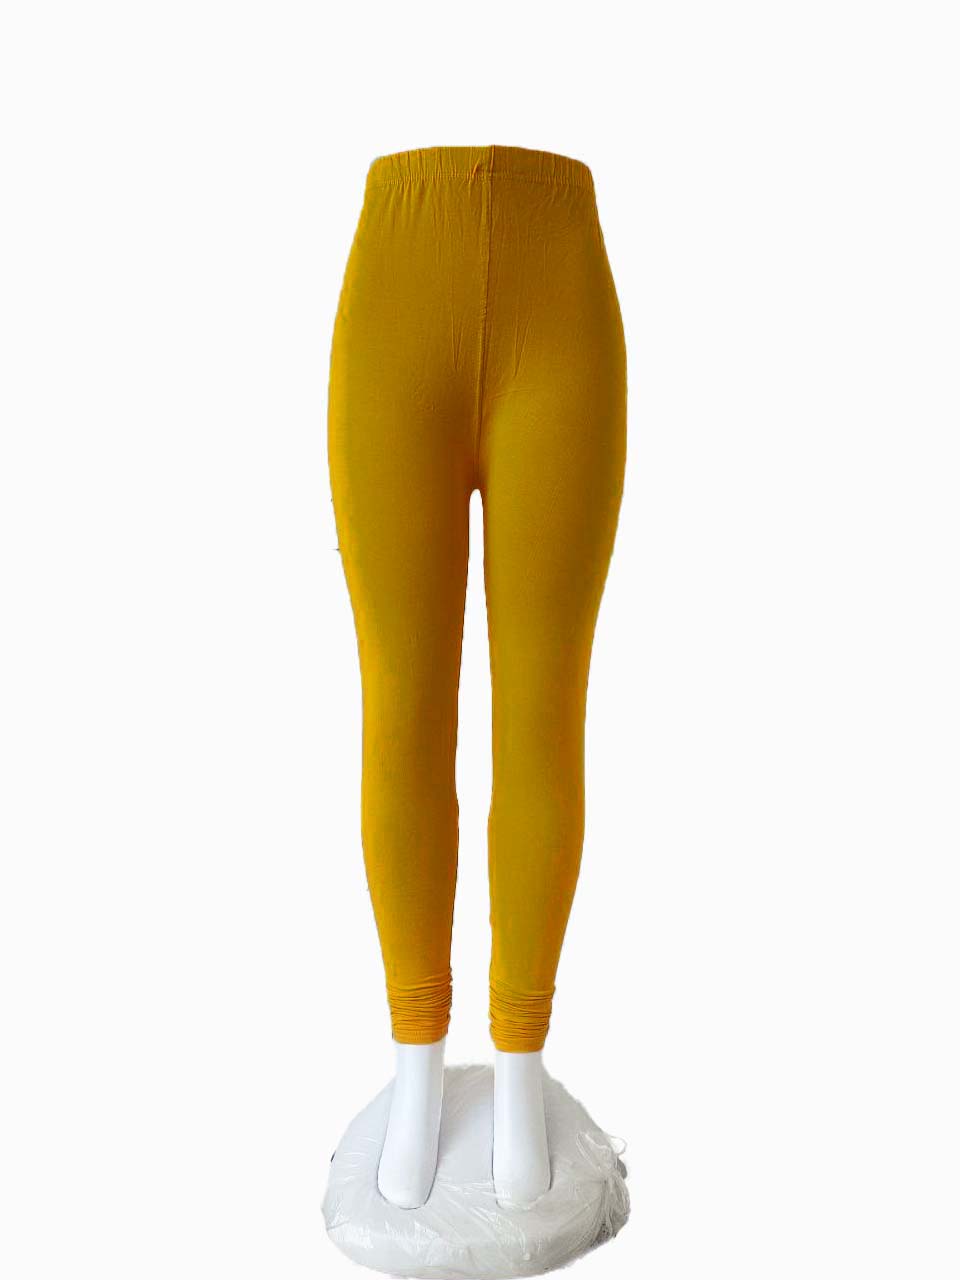 Buy Elegant Woolen Solid Leggings For Women- Pack Of 2,Yellow, Dark Grey  Online In India At Discounted Prices